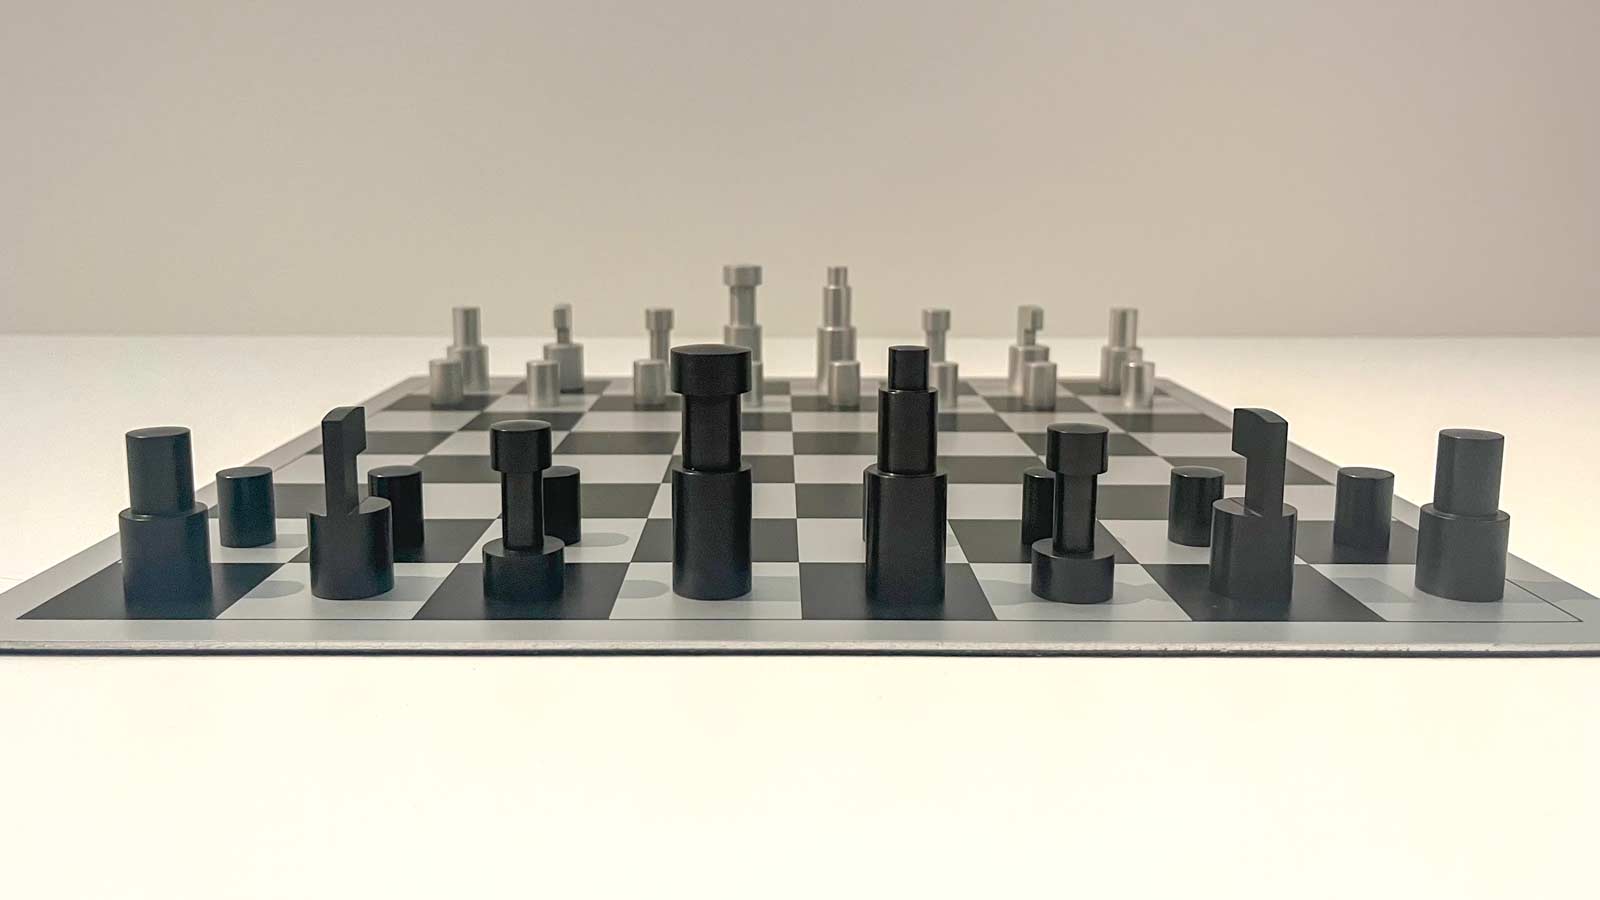 Fig. 6. Vilmos Huszár, chess board with chess men, design 1921, production of this example 1974, aluminium. Stedelijk Museum Amsterdam, Photo by Ginger van den Akker.